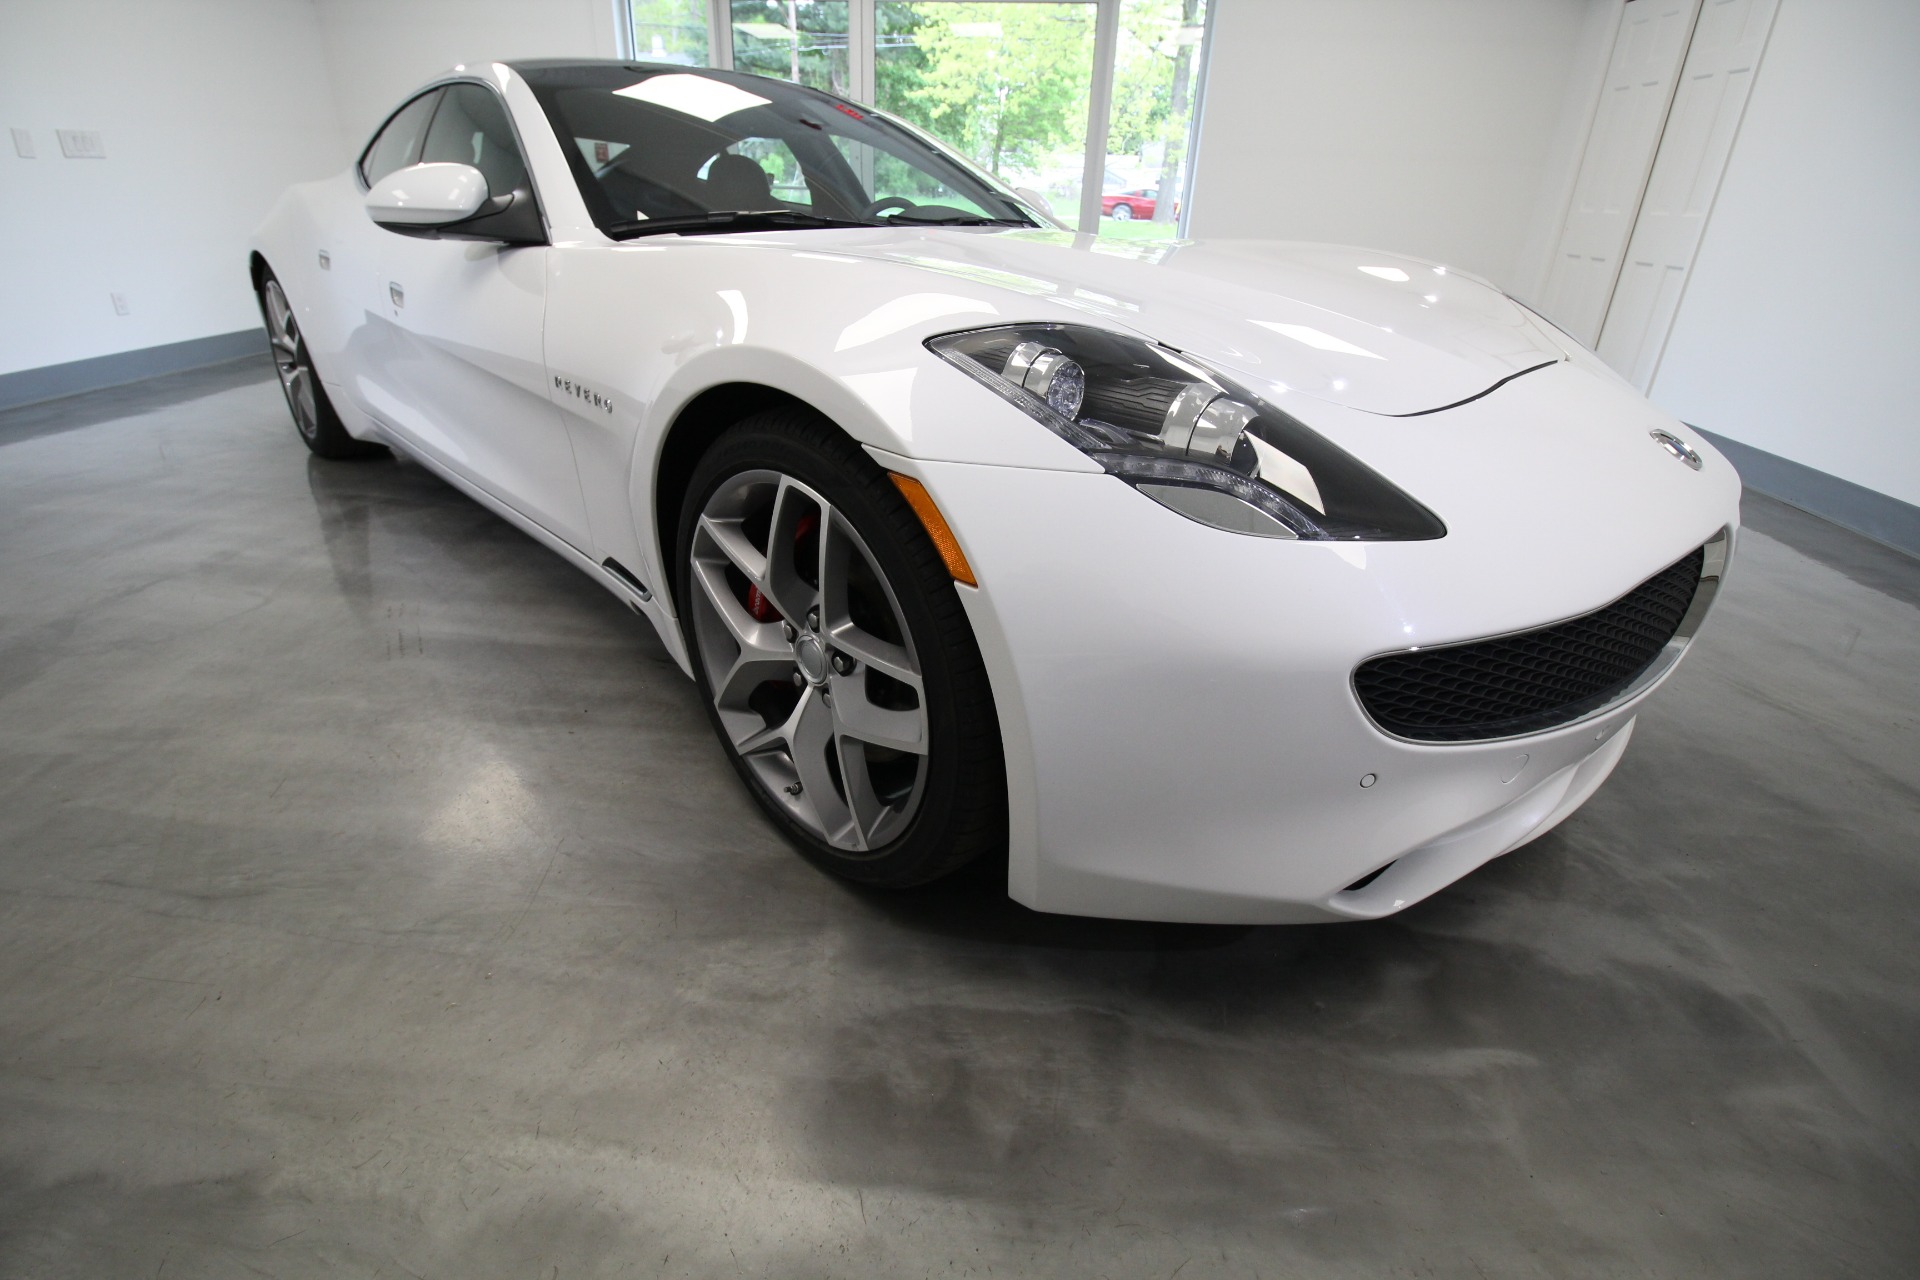 Used 2018 WHITE Karma REVERO REVERO 1 OWNER LEASE TURN IN LOCAL SOLD NEW BY US | Albany, NY